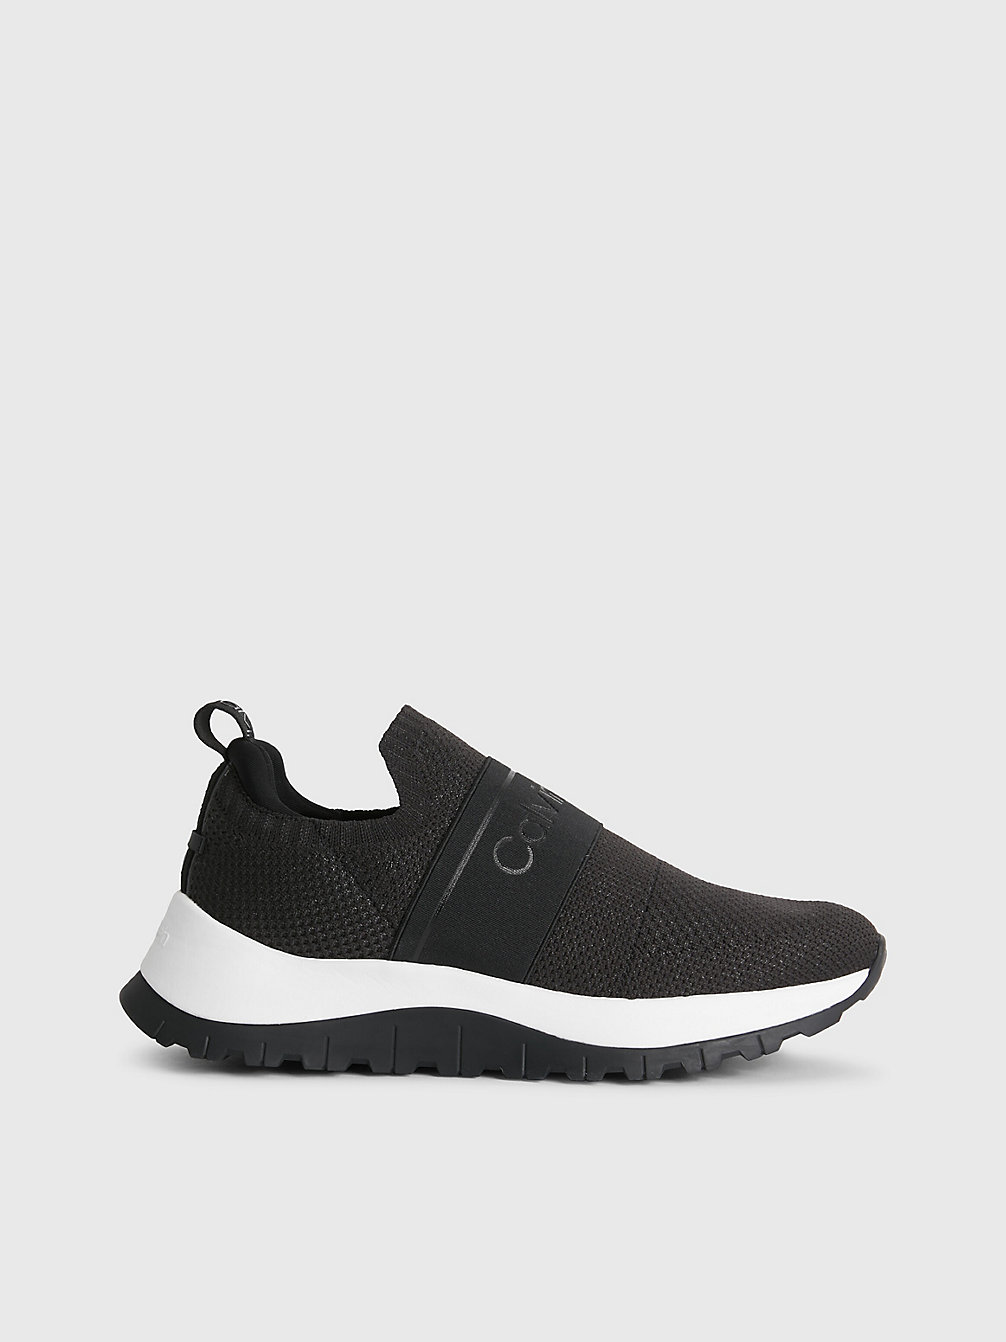 CK BLACK Recycled Knit Slip-On Trainers undefined women Calvin Klein